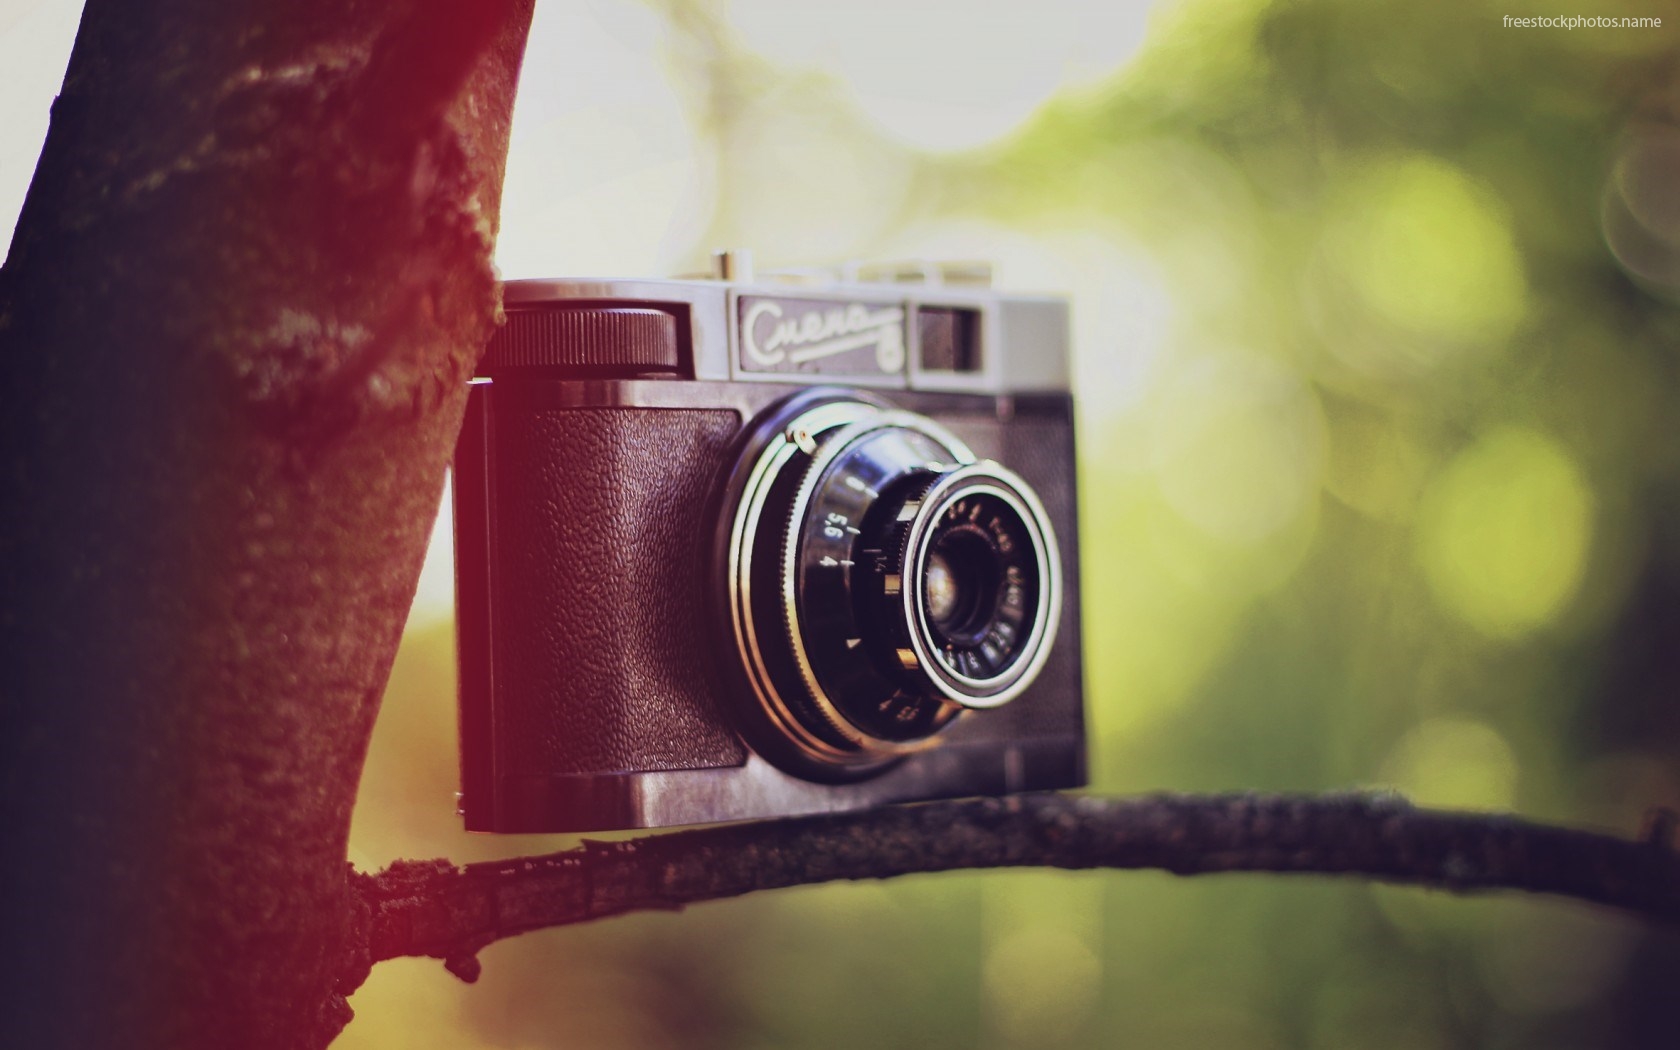 Free download download stock photos of cute camera for wallpaper images photography x for your desktop mobile tablet explore cute camera wallpaper cute background cute wallpaper background cute